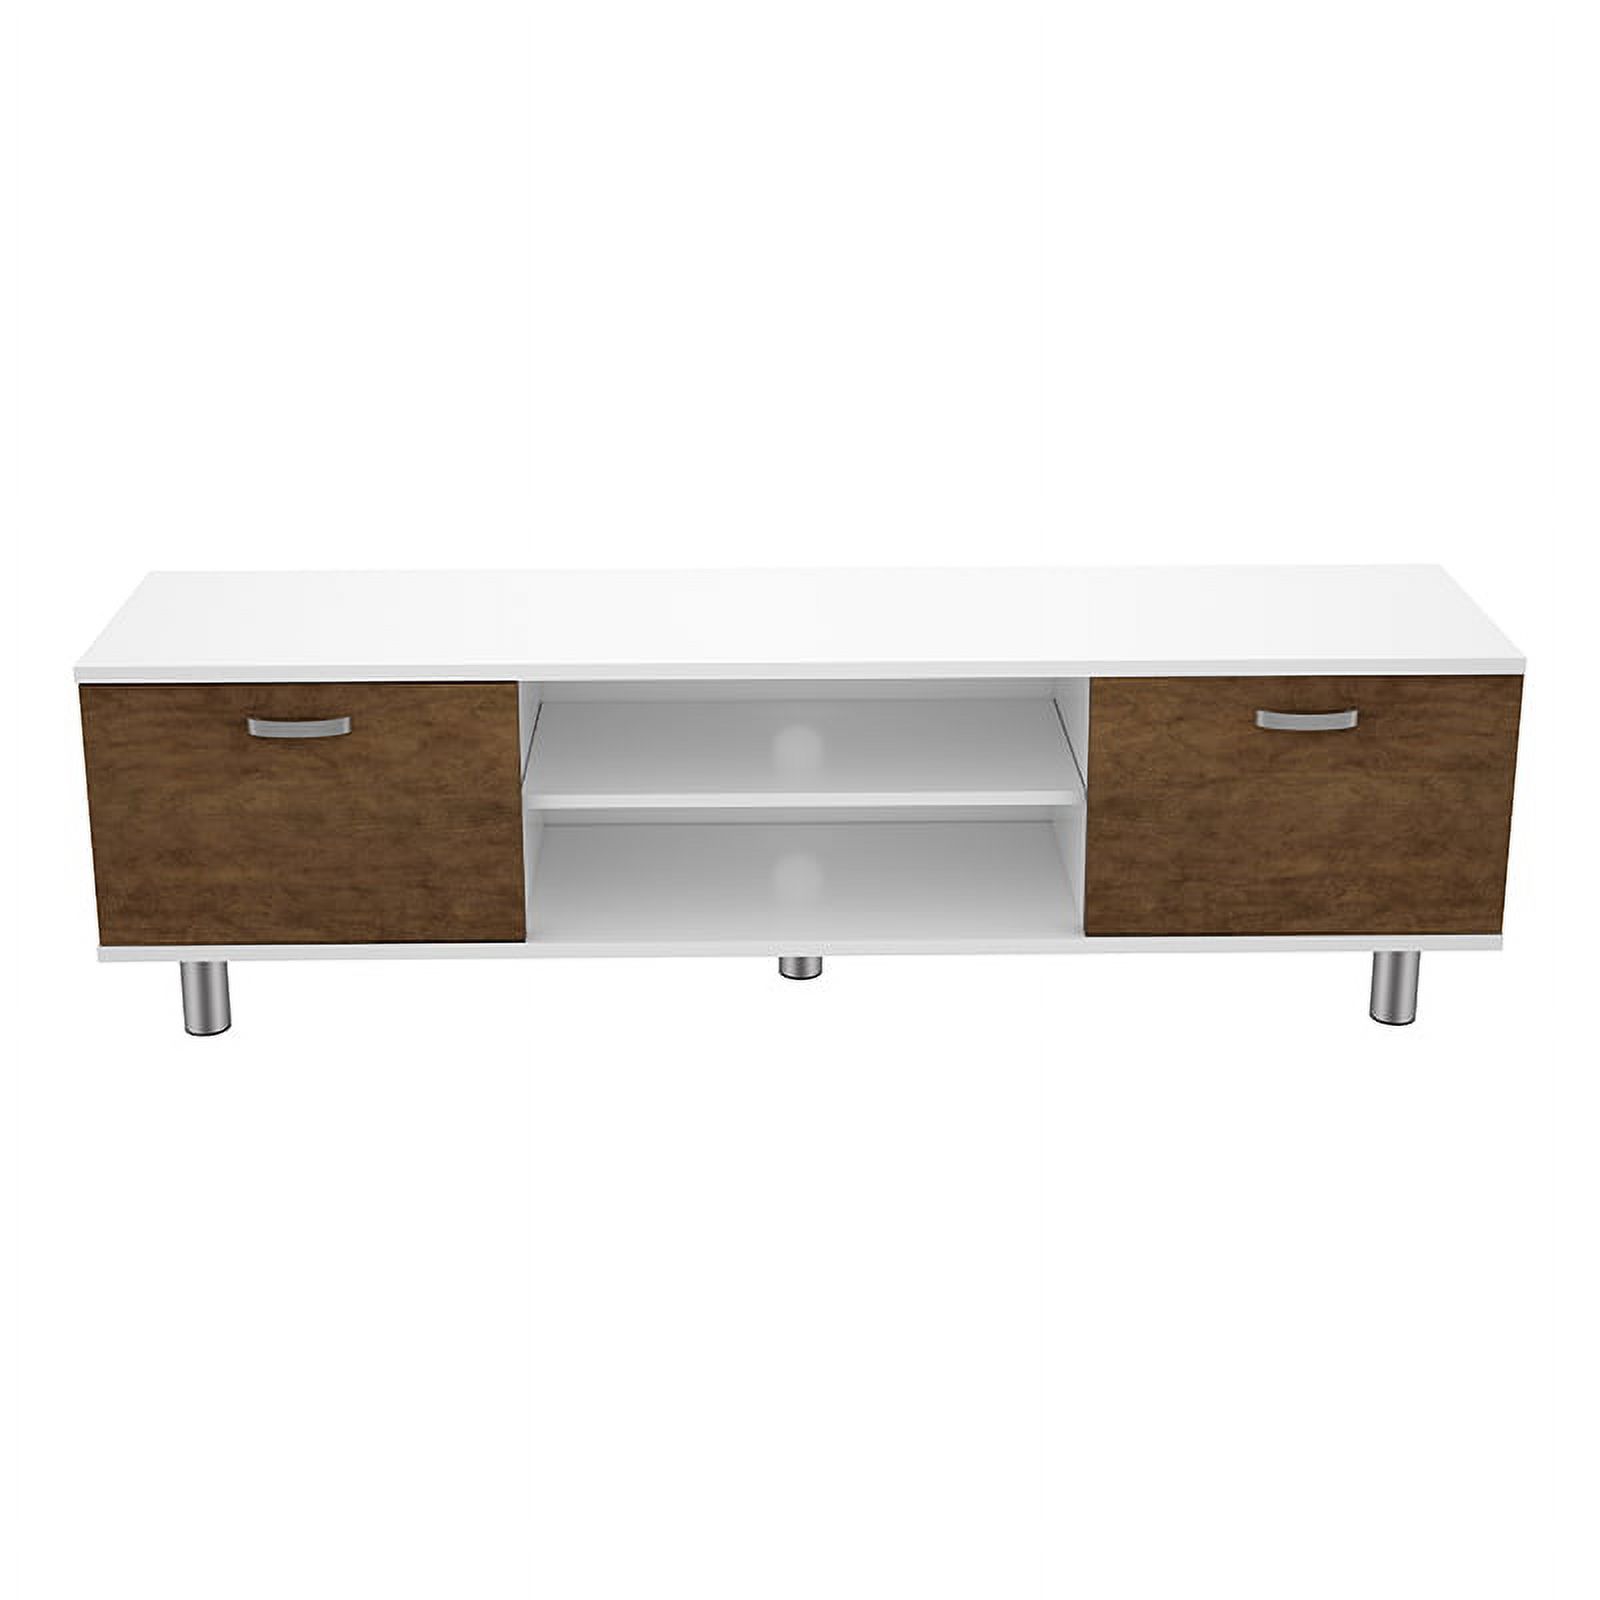 FS1500MAHW-A TV Stand for TVs 32”, 37”, 39”, 40”, 42”, 46”, 47”, 50”, 52”, 55”, 58”, 60”, 65”, White Finish, plus Walnut Finish Doors, Includes Cable Management. - image 2 of 3